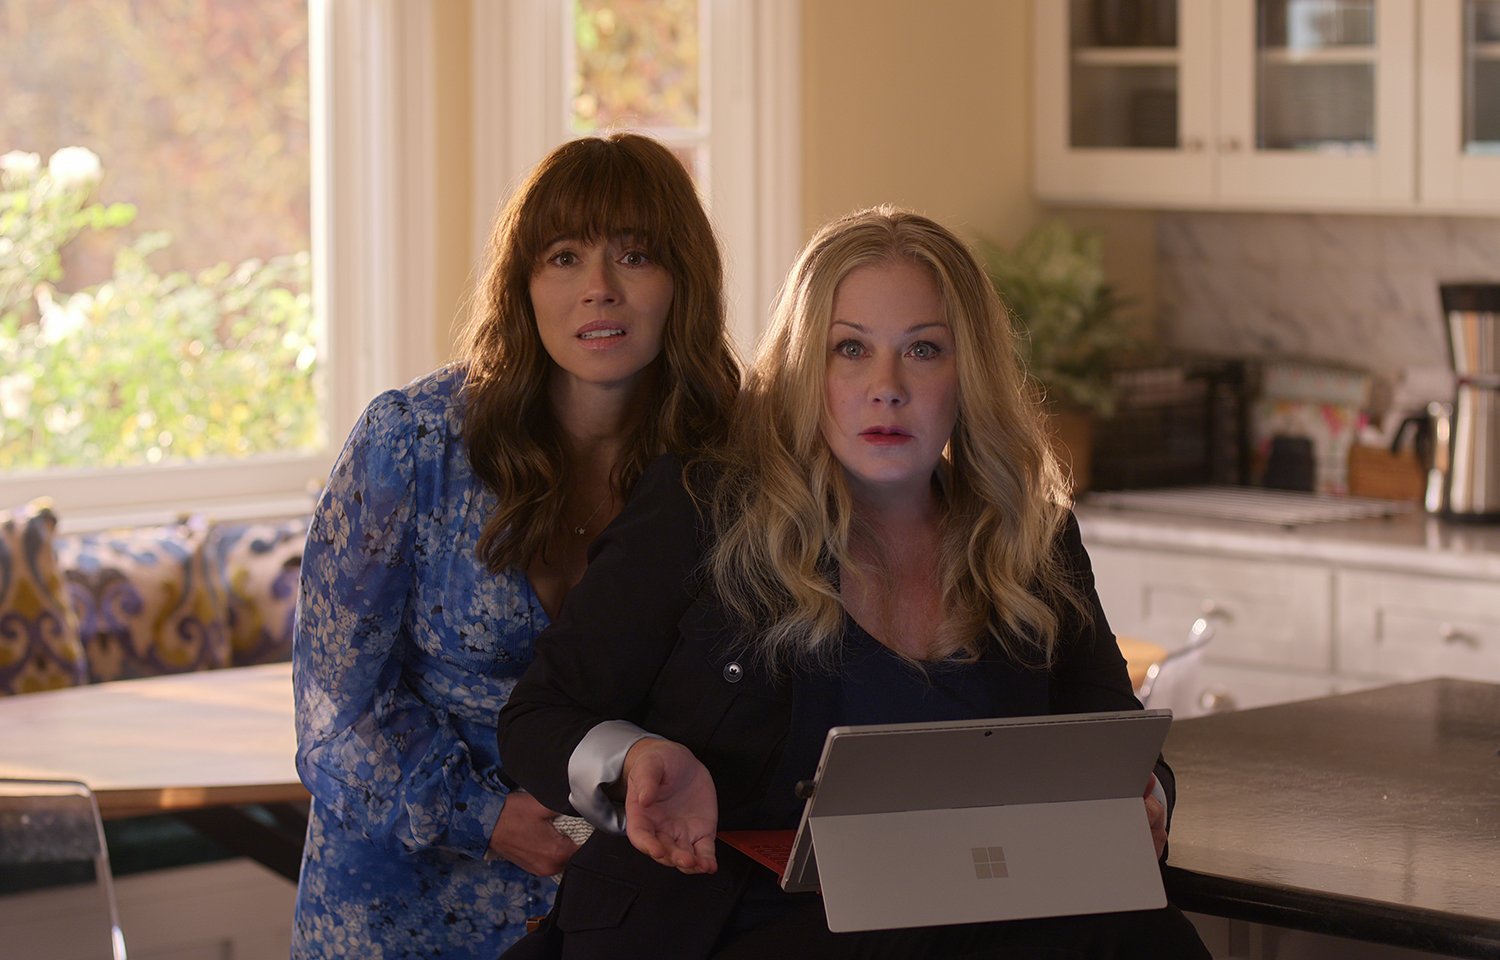 Dead to Me Season 3: Linda Cardellini's Judy Hale stands close to Christina Applegate's Jen Harding as she sits at a counter with a tablet.